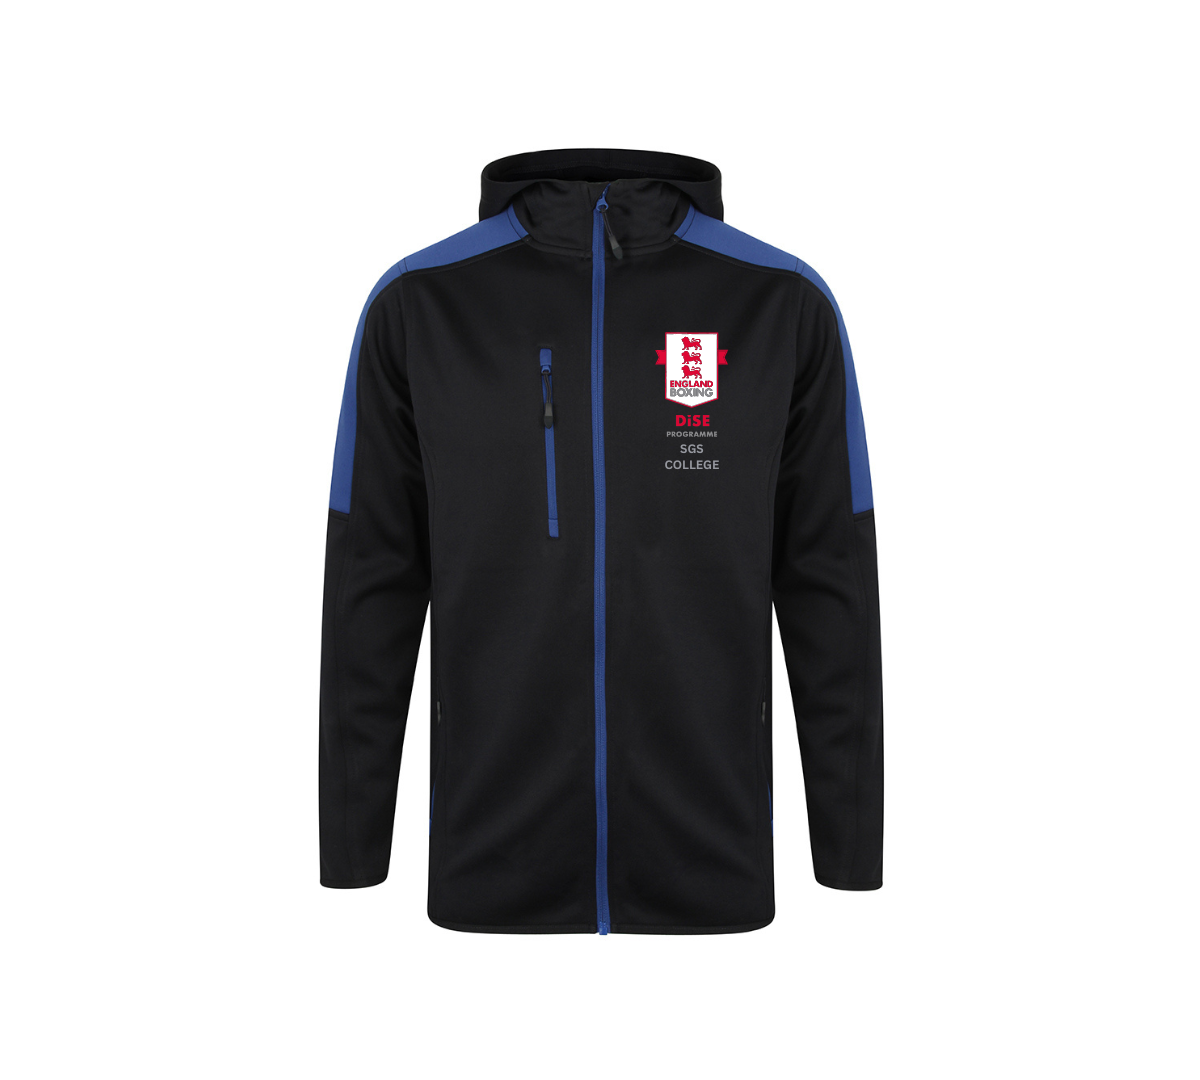 DiSE Programme (SGS College) Softshell Hoodie